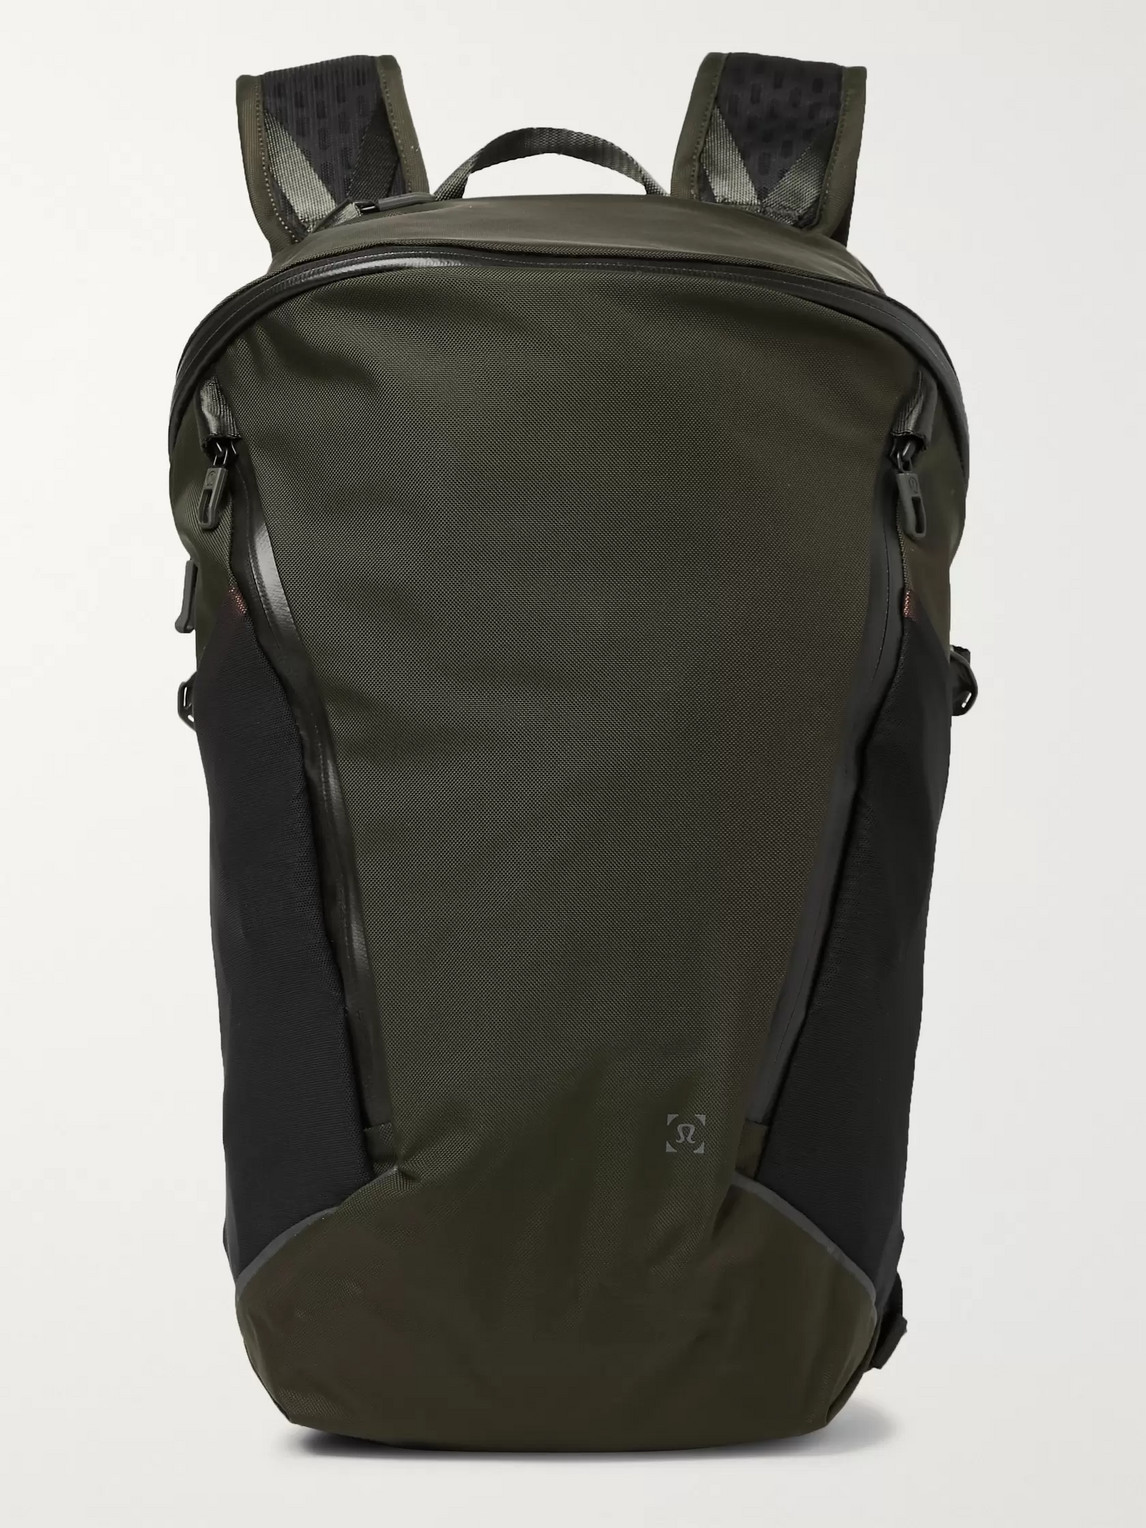 Lululemon More Miles Active Canvas Backpack In Green